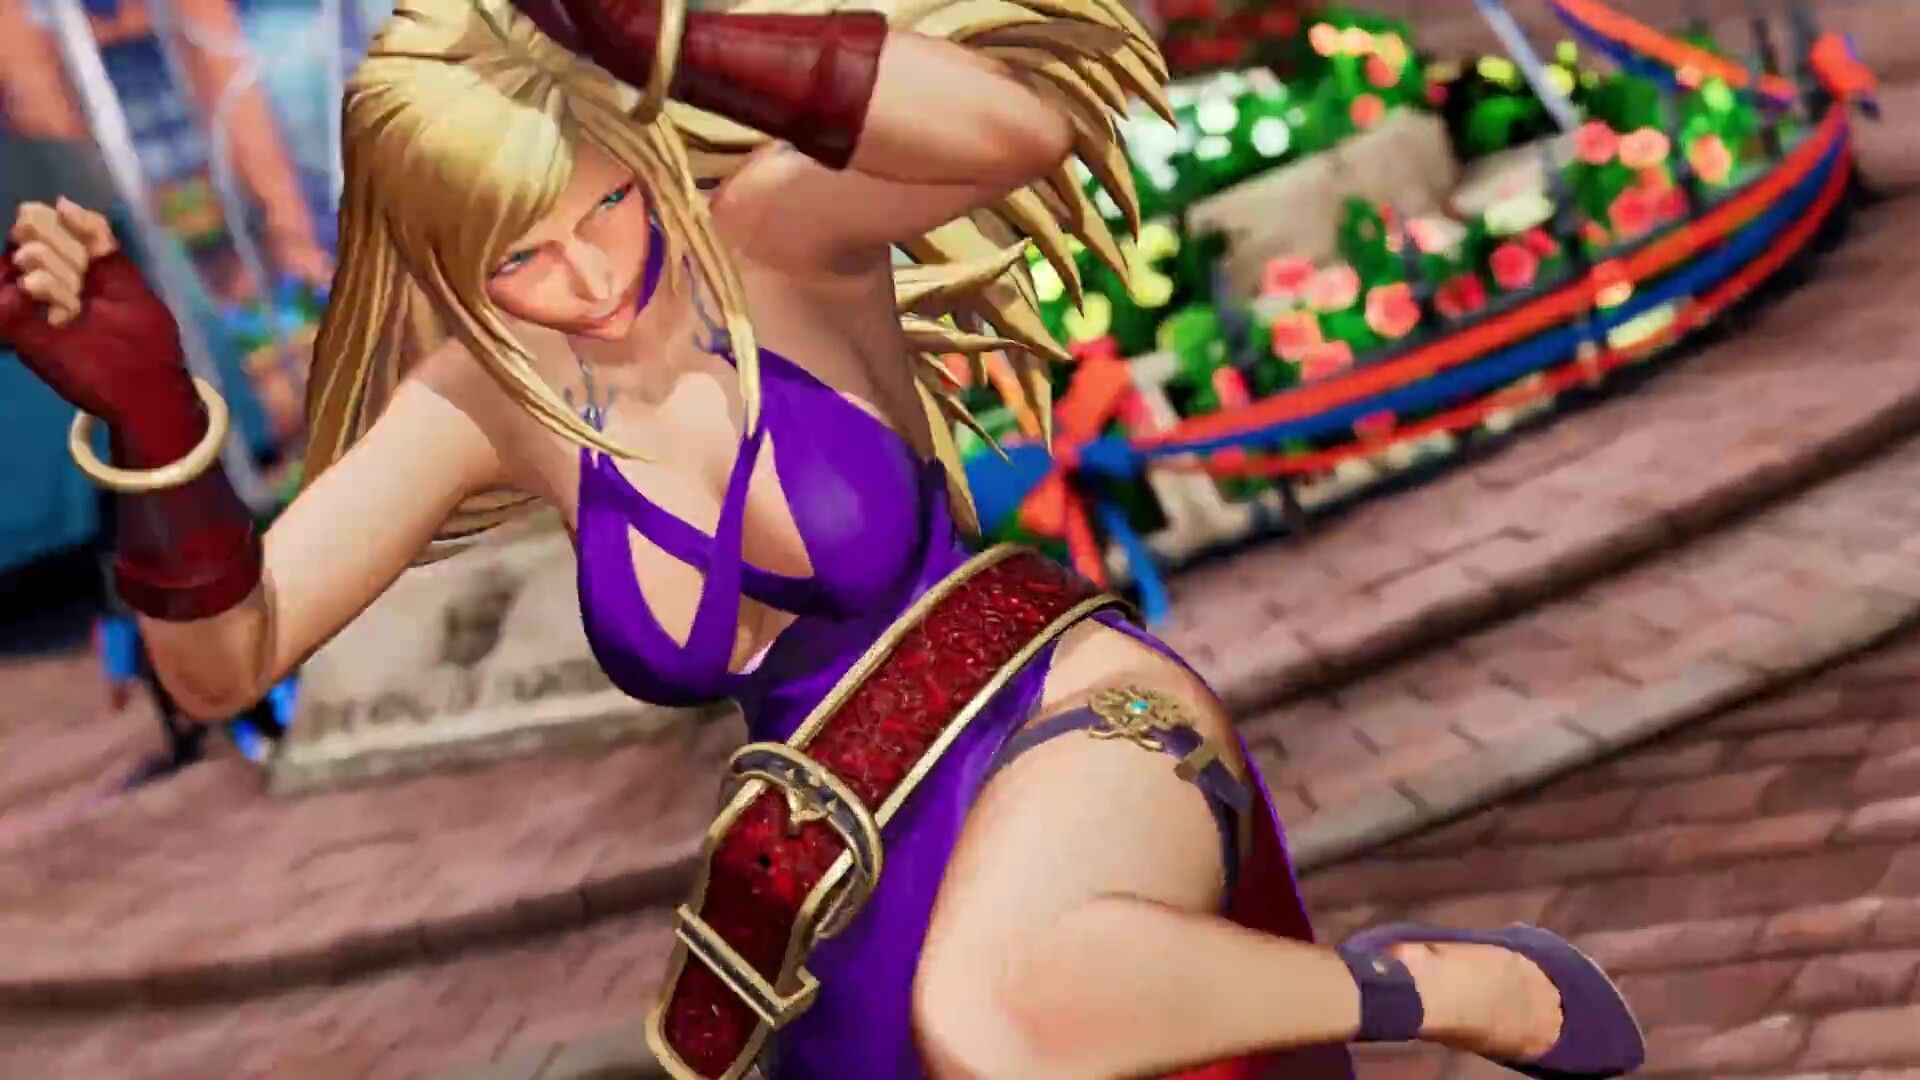 THE KING OF FIGHTERS XV B. Jenny enters the DLC in an erotic dress with and rounded thighs 12